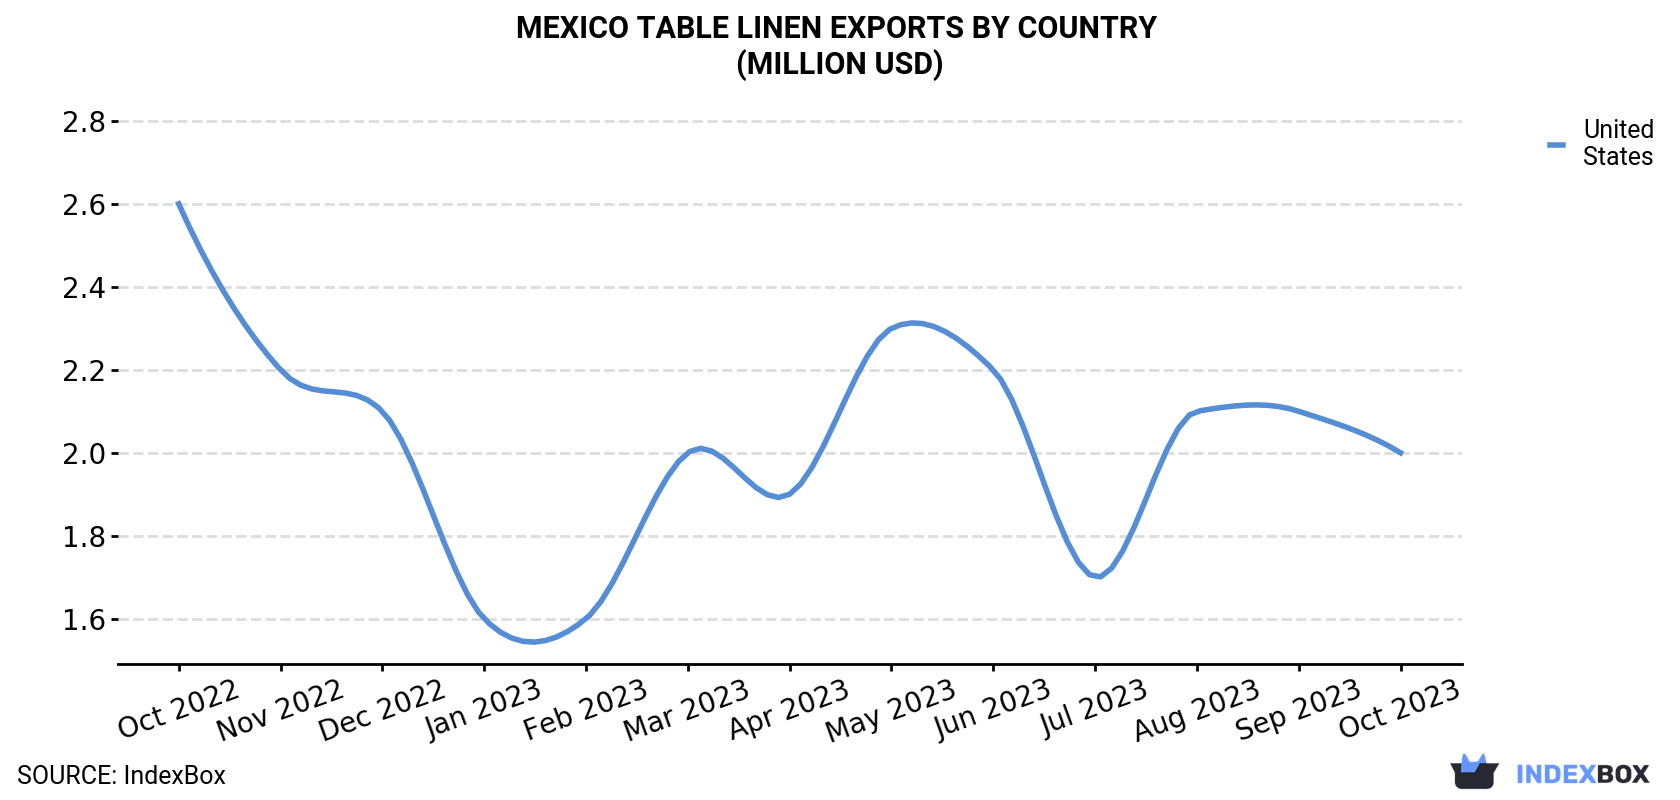 Mexico Table Linen Exports By Country (Million USD)